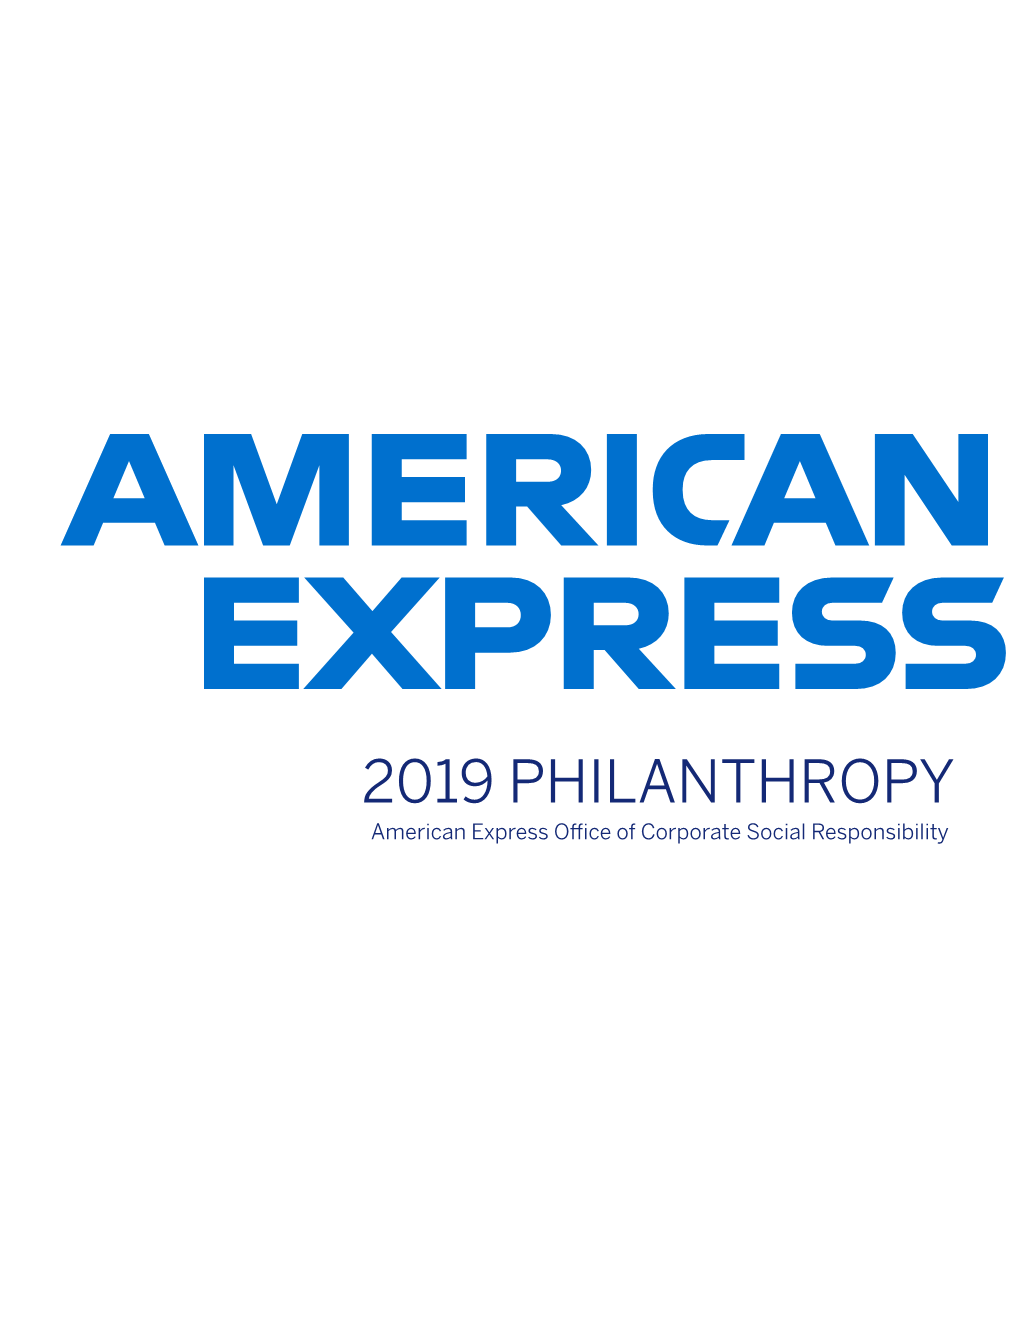 2019 PHILANTHROPY Our Priority Giving Areas: Developing Leaders, Preserving Places and Serving Communities